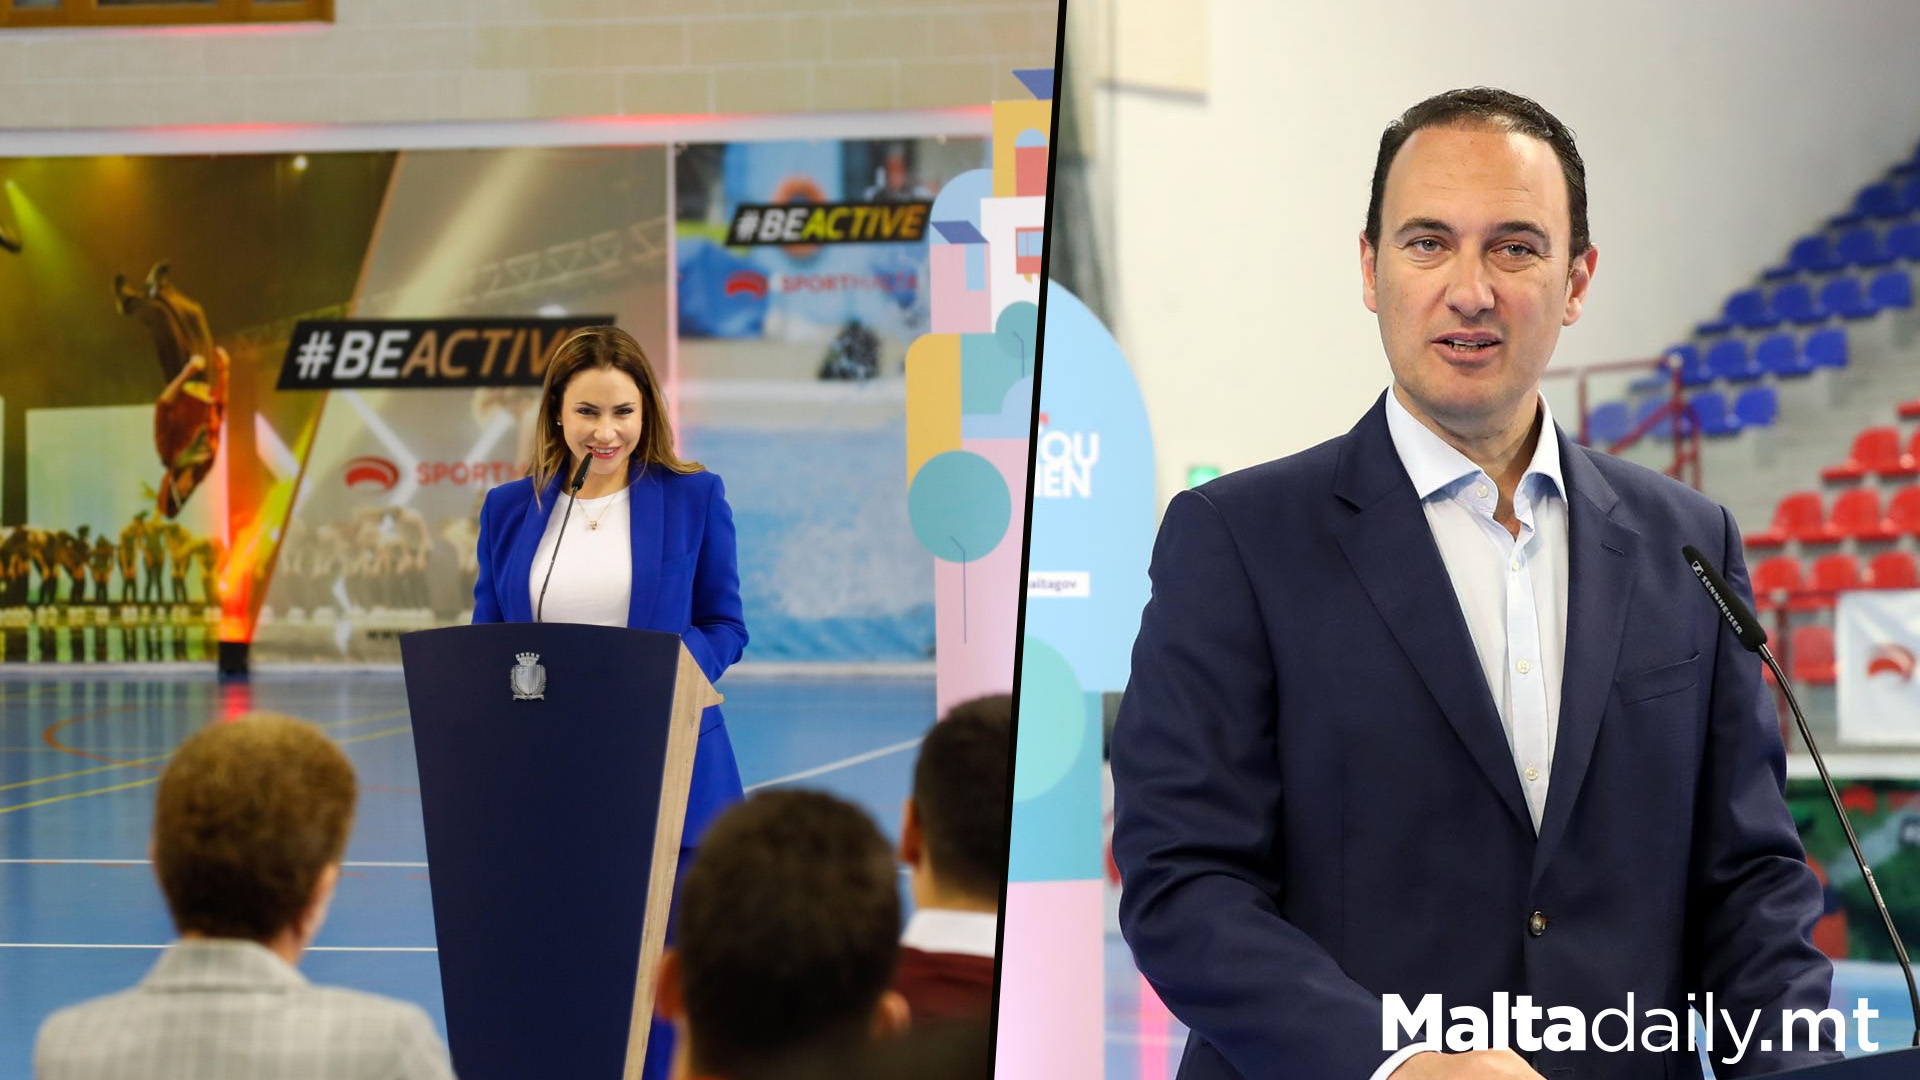 €600K To Be Allocated To Special Olympics Malta Over 3 Years